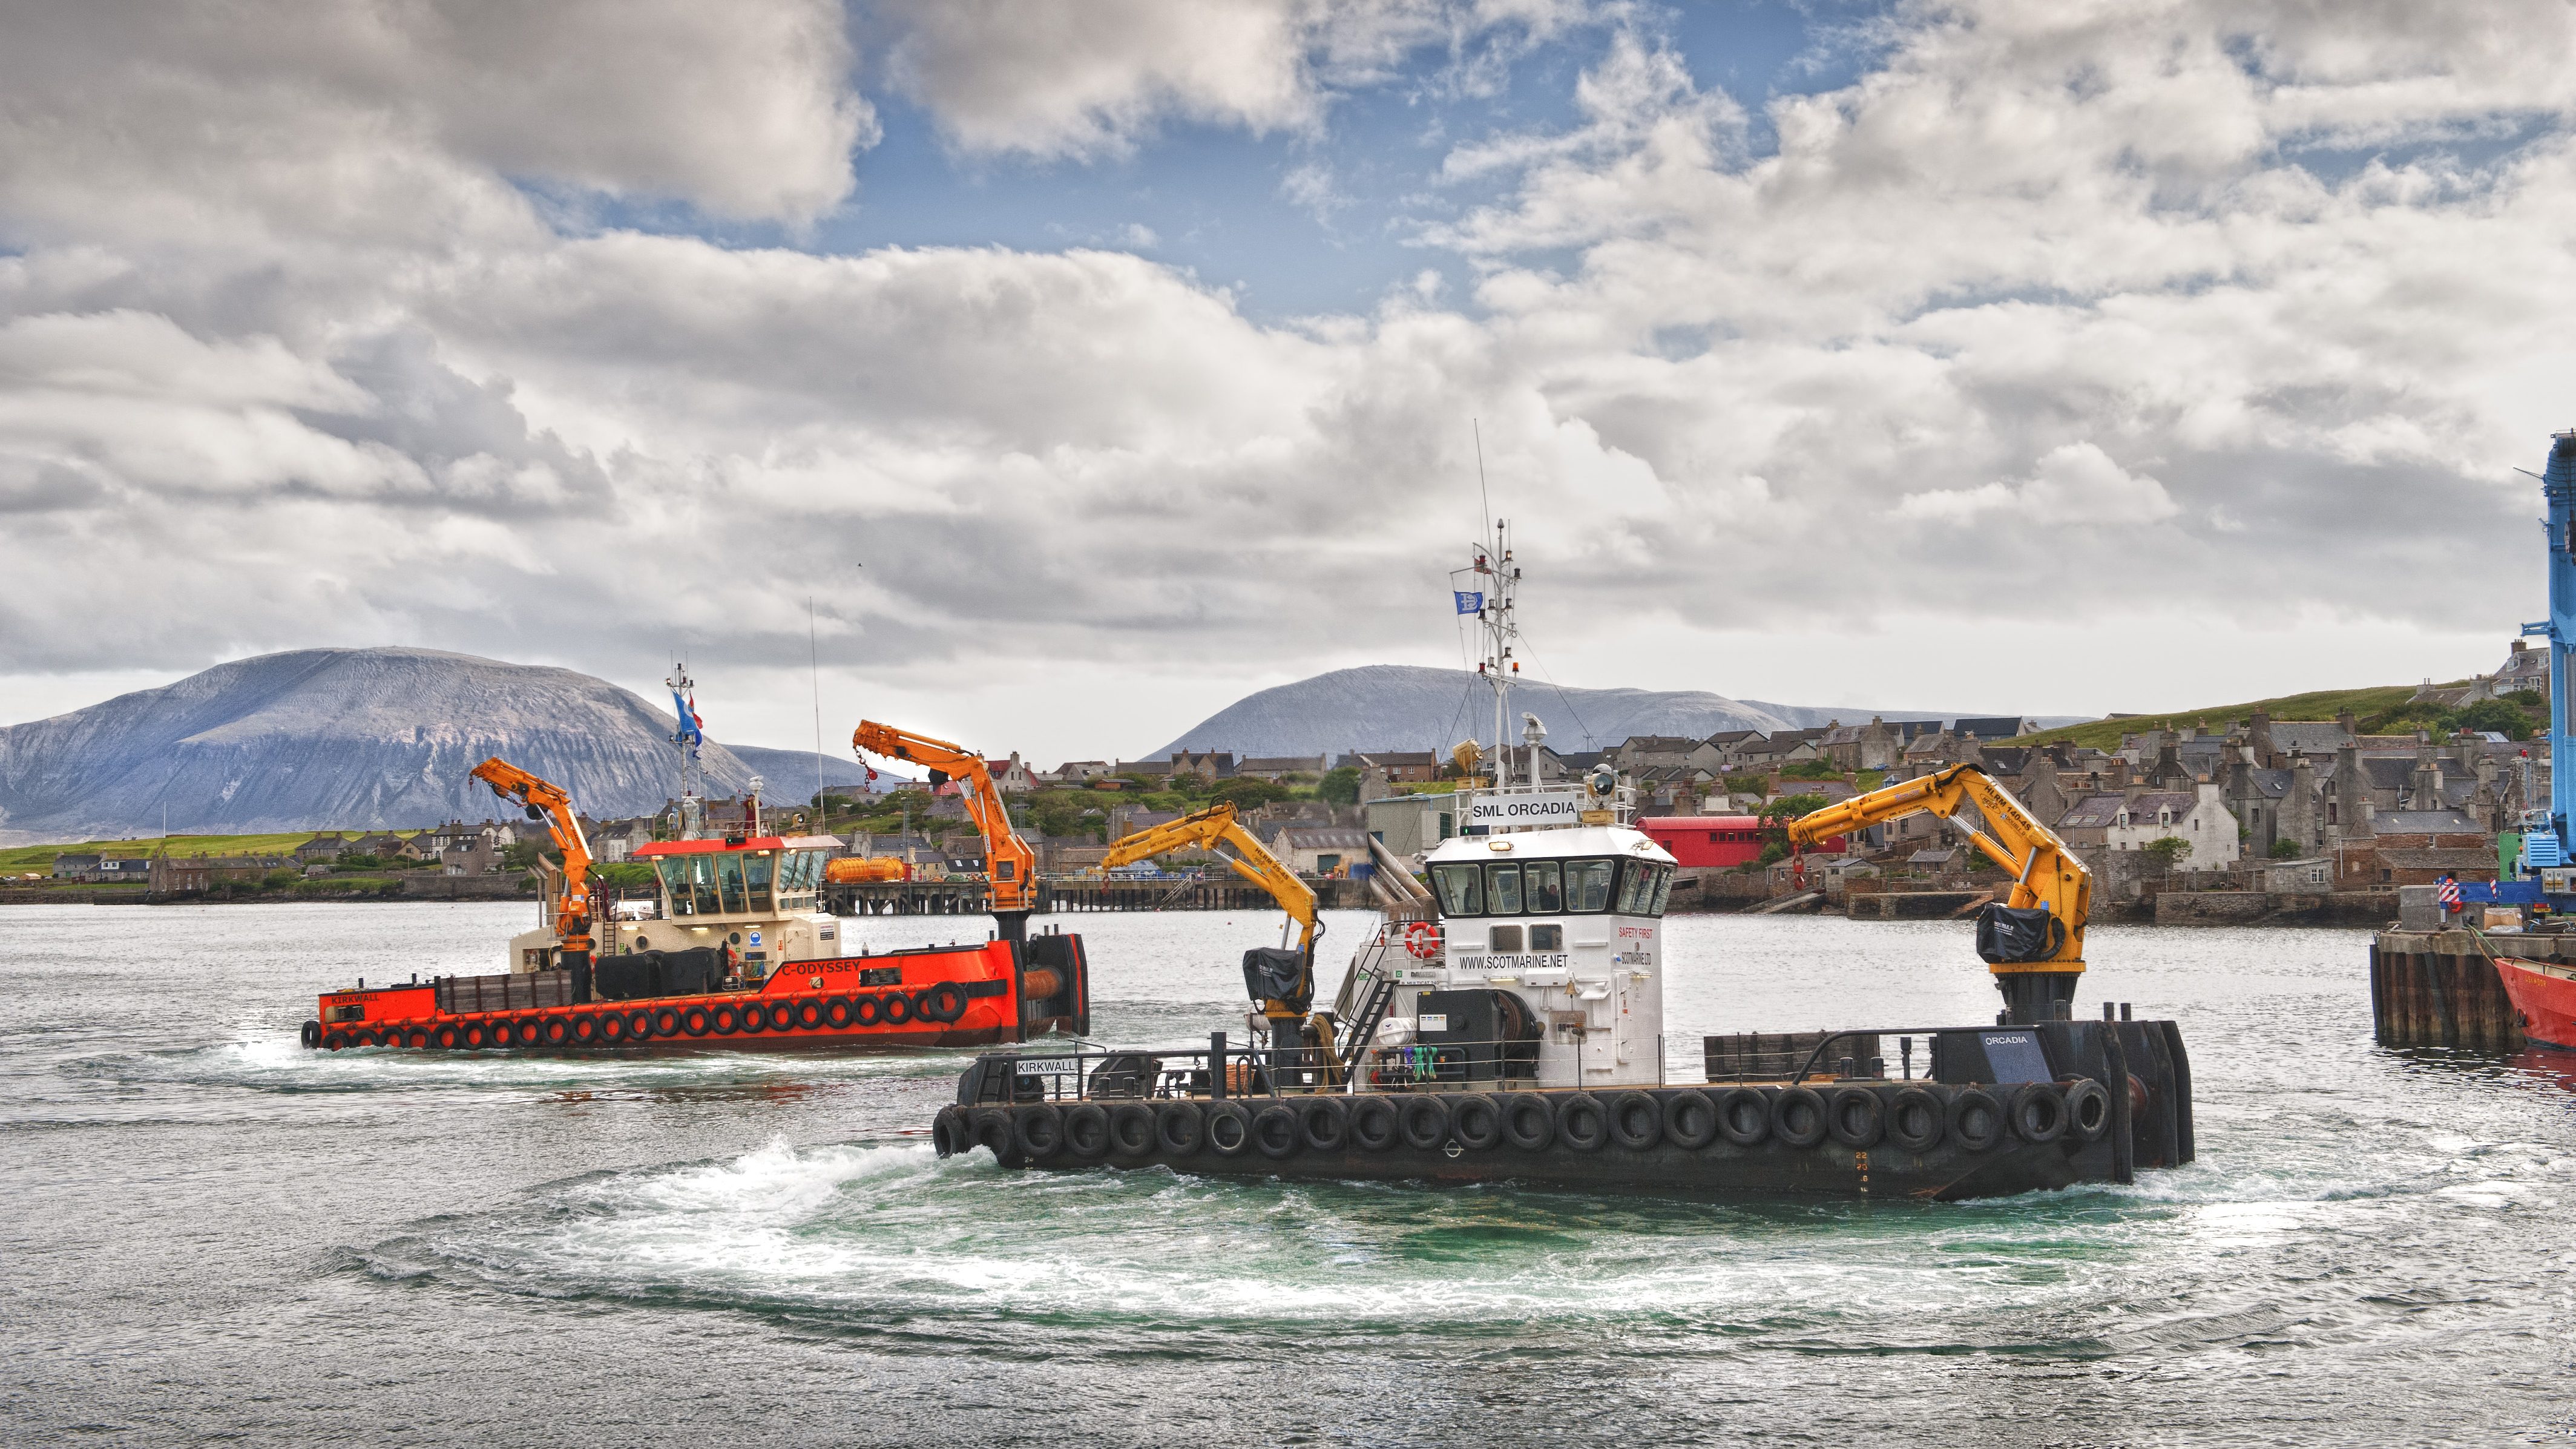 ocean energy scotland - Supply chain vessels (Credit Mike Brookes-Roper, courtesy of EMEC)